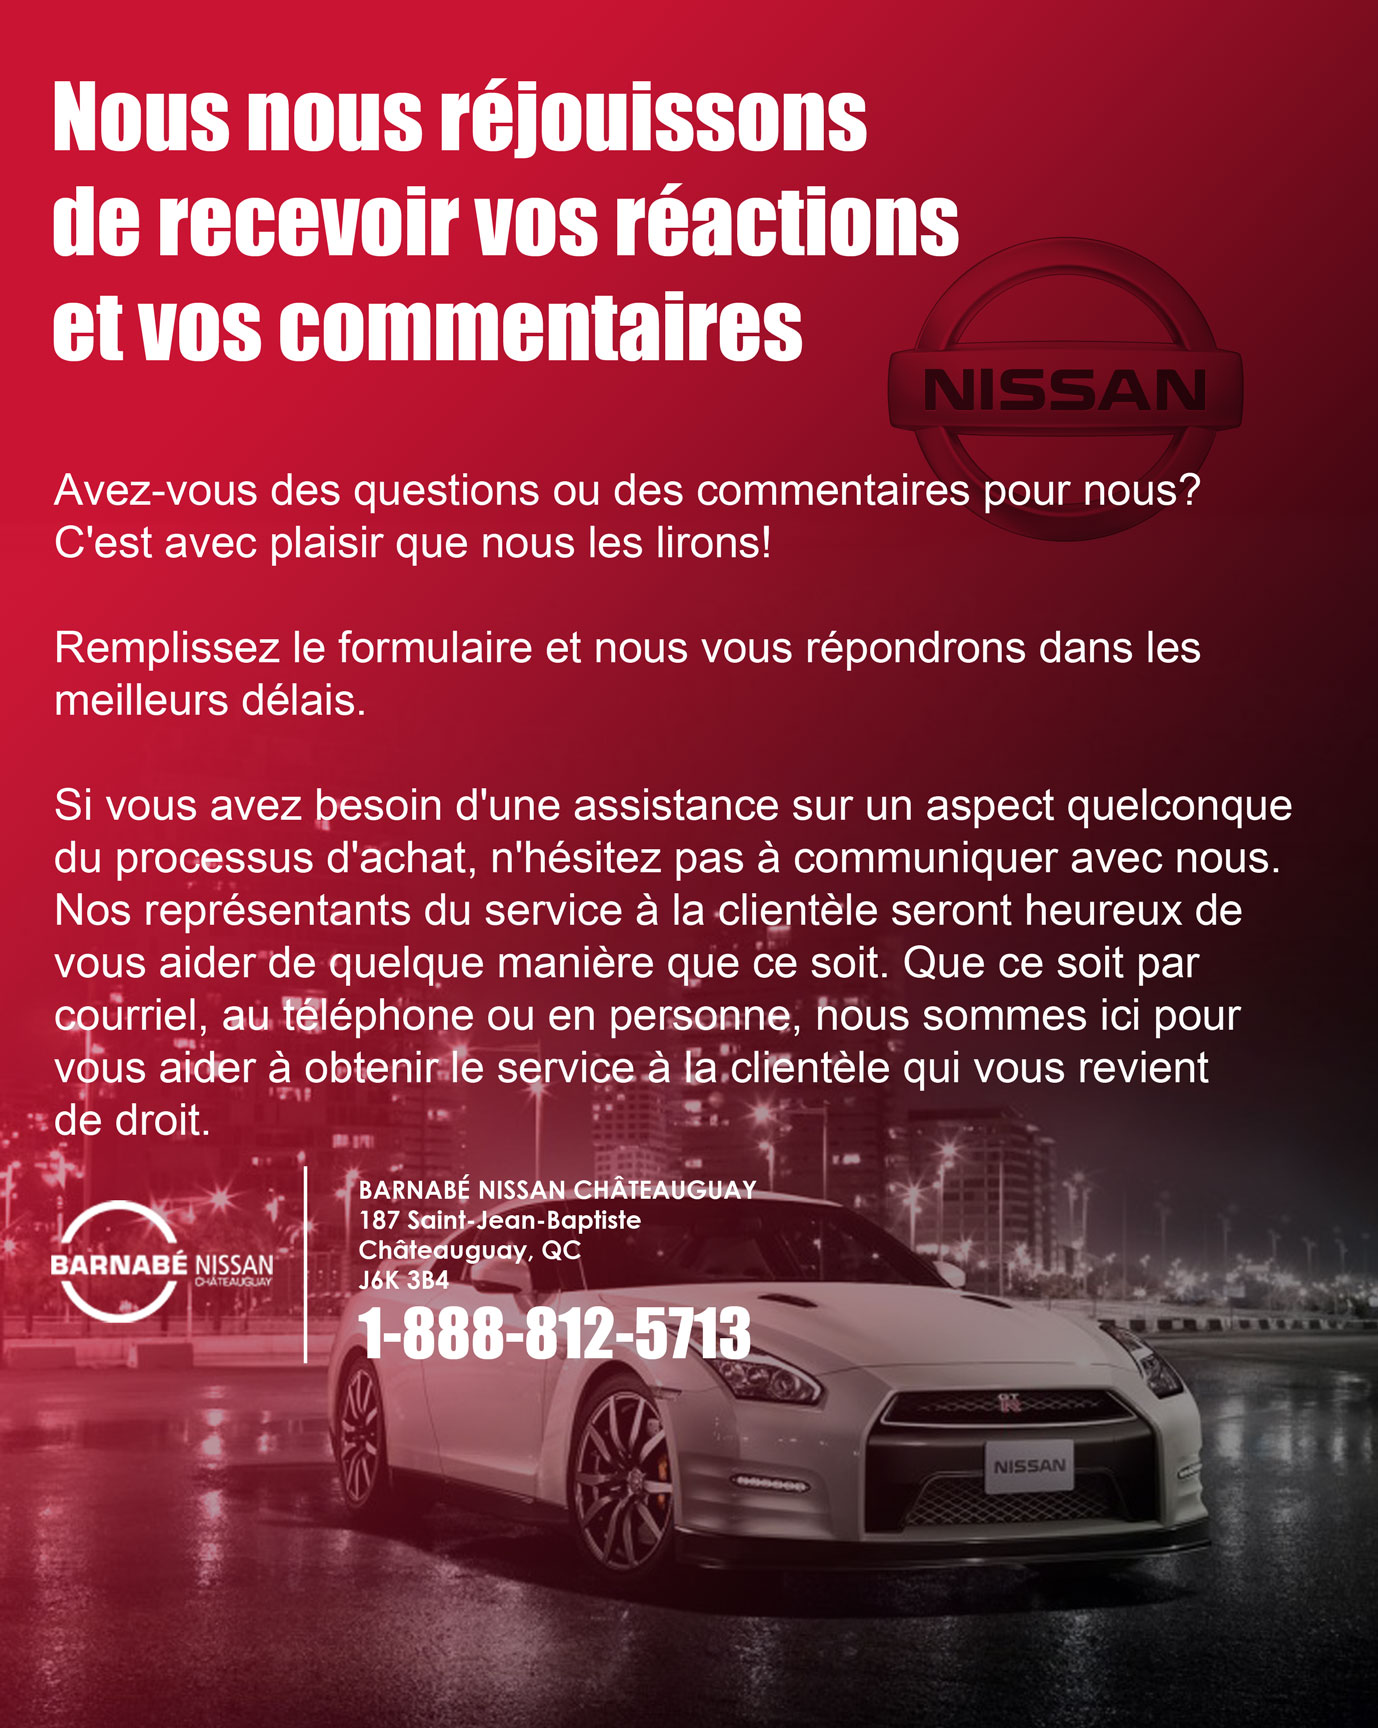 Chateauguay nissan dealer